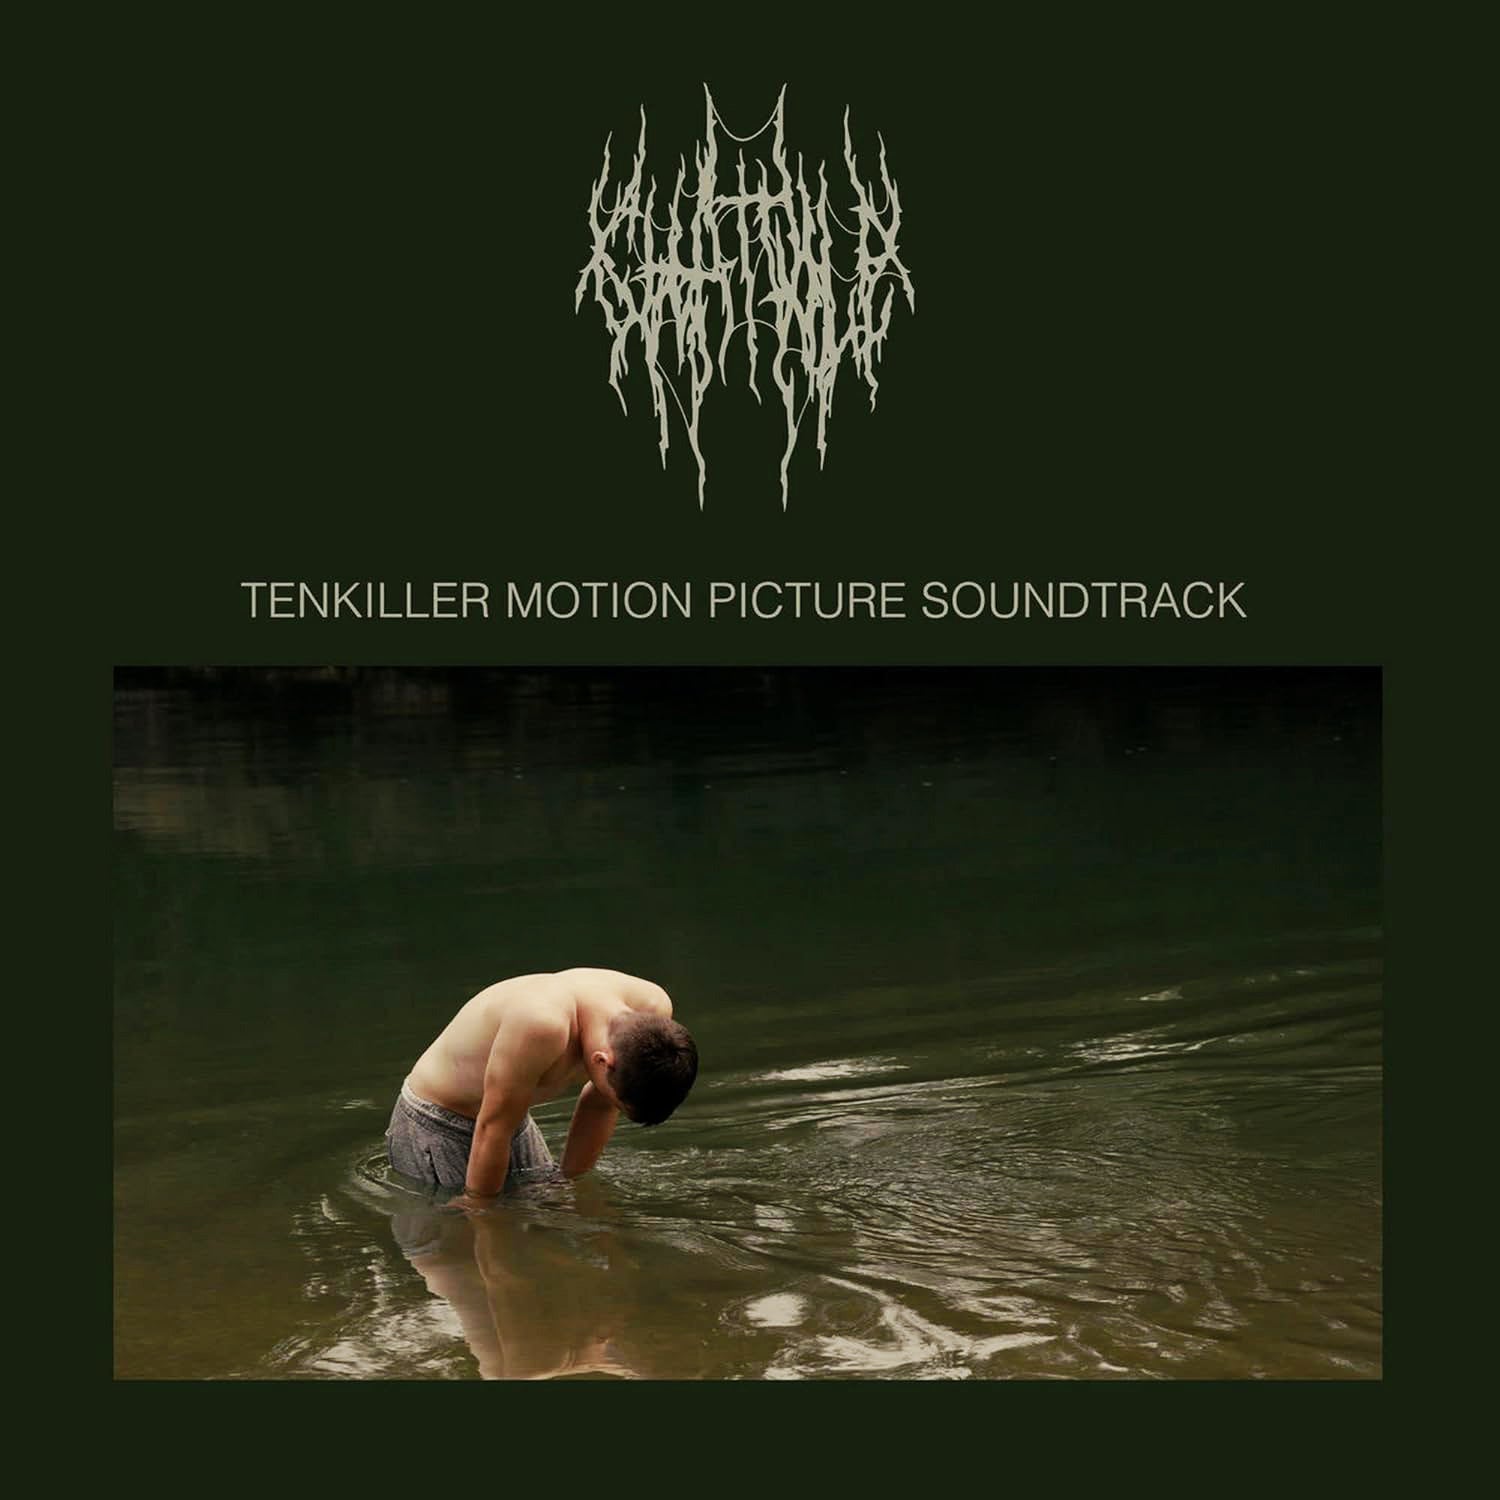 CHAT PILE – Tenkiller Motion Picture Soundtrack